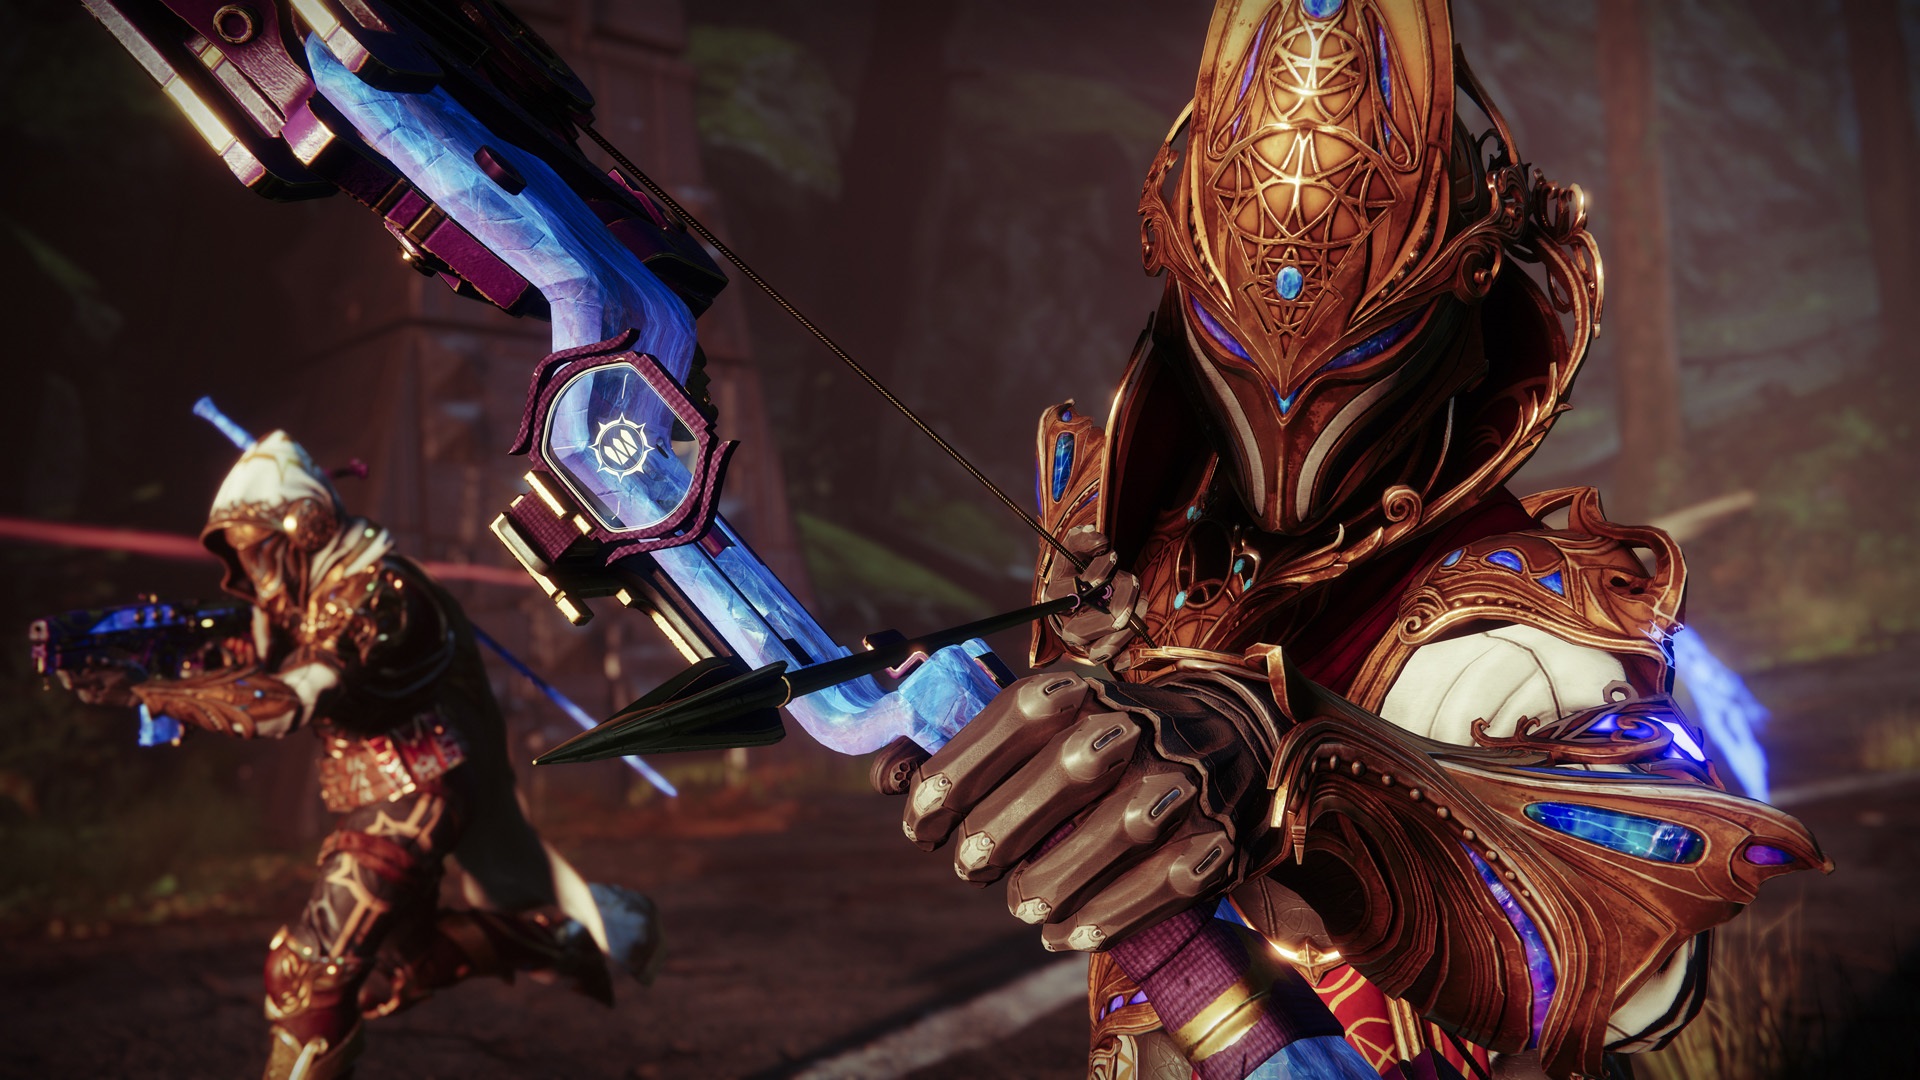 Best Destiny 2 Warlock builds for PvP and PvE